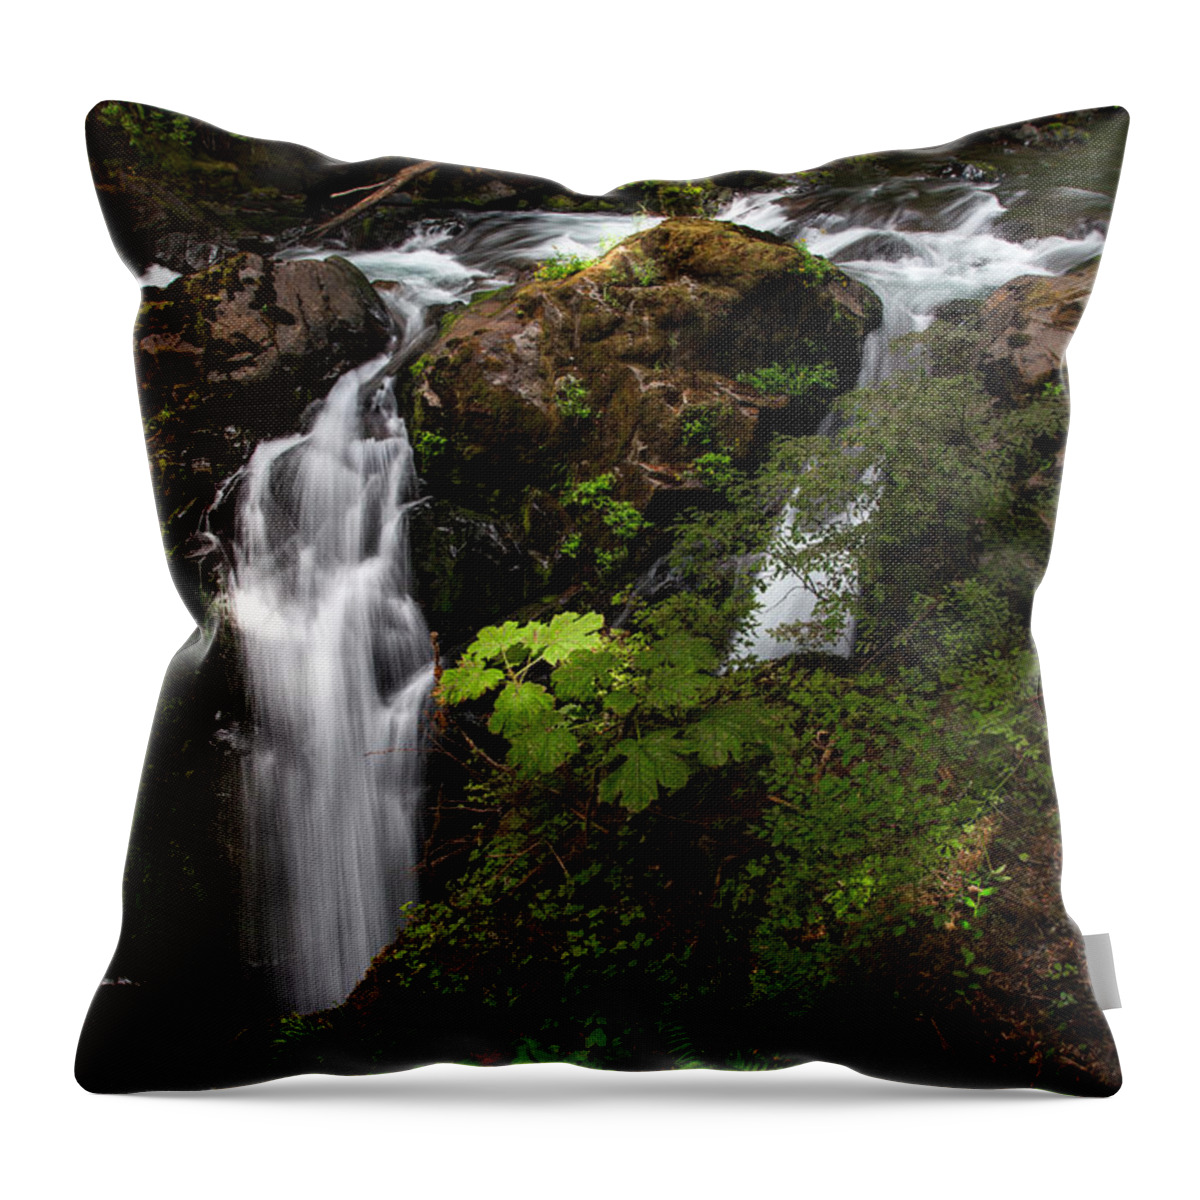 Olympic National Park Throw Pillow featuring the photograph Olympic National Park by Larry Marshall